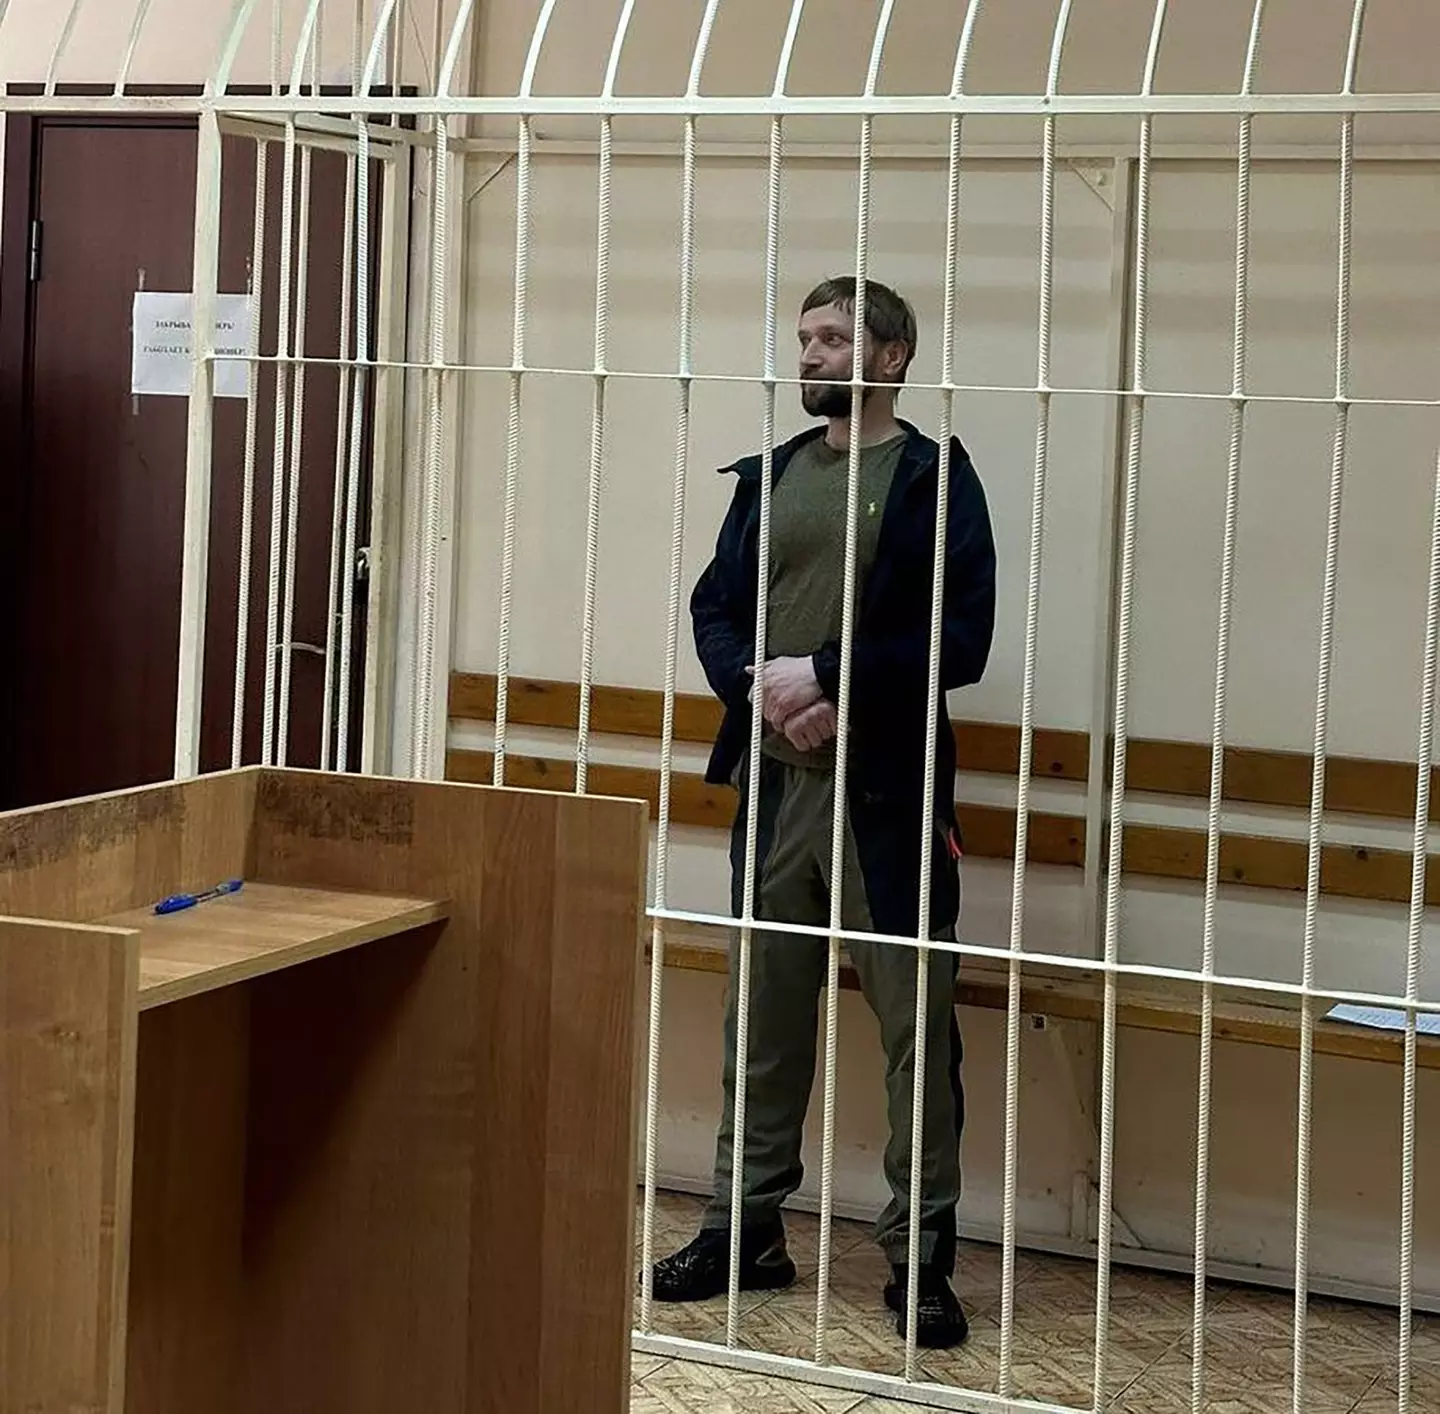 Lyutyi told the court he was guilty of 'negligence'. (East2West News)